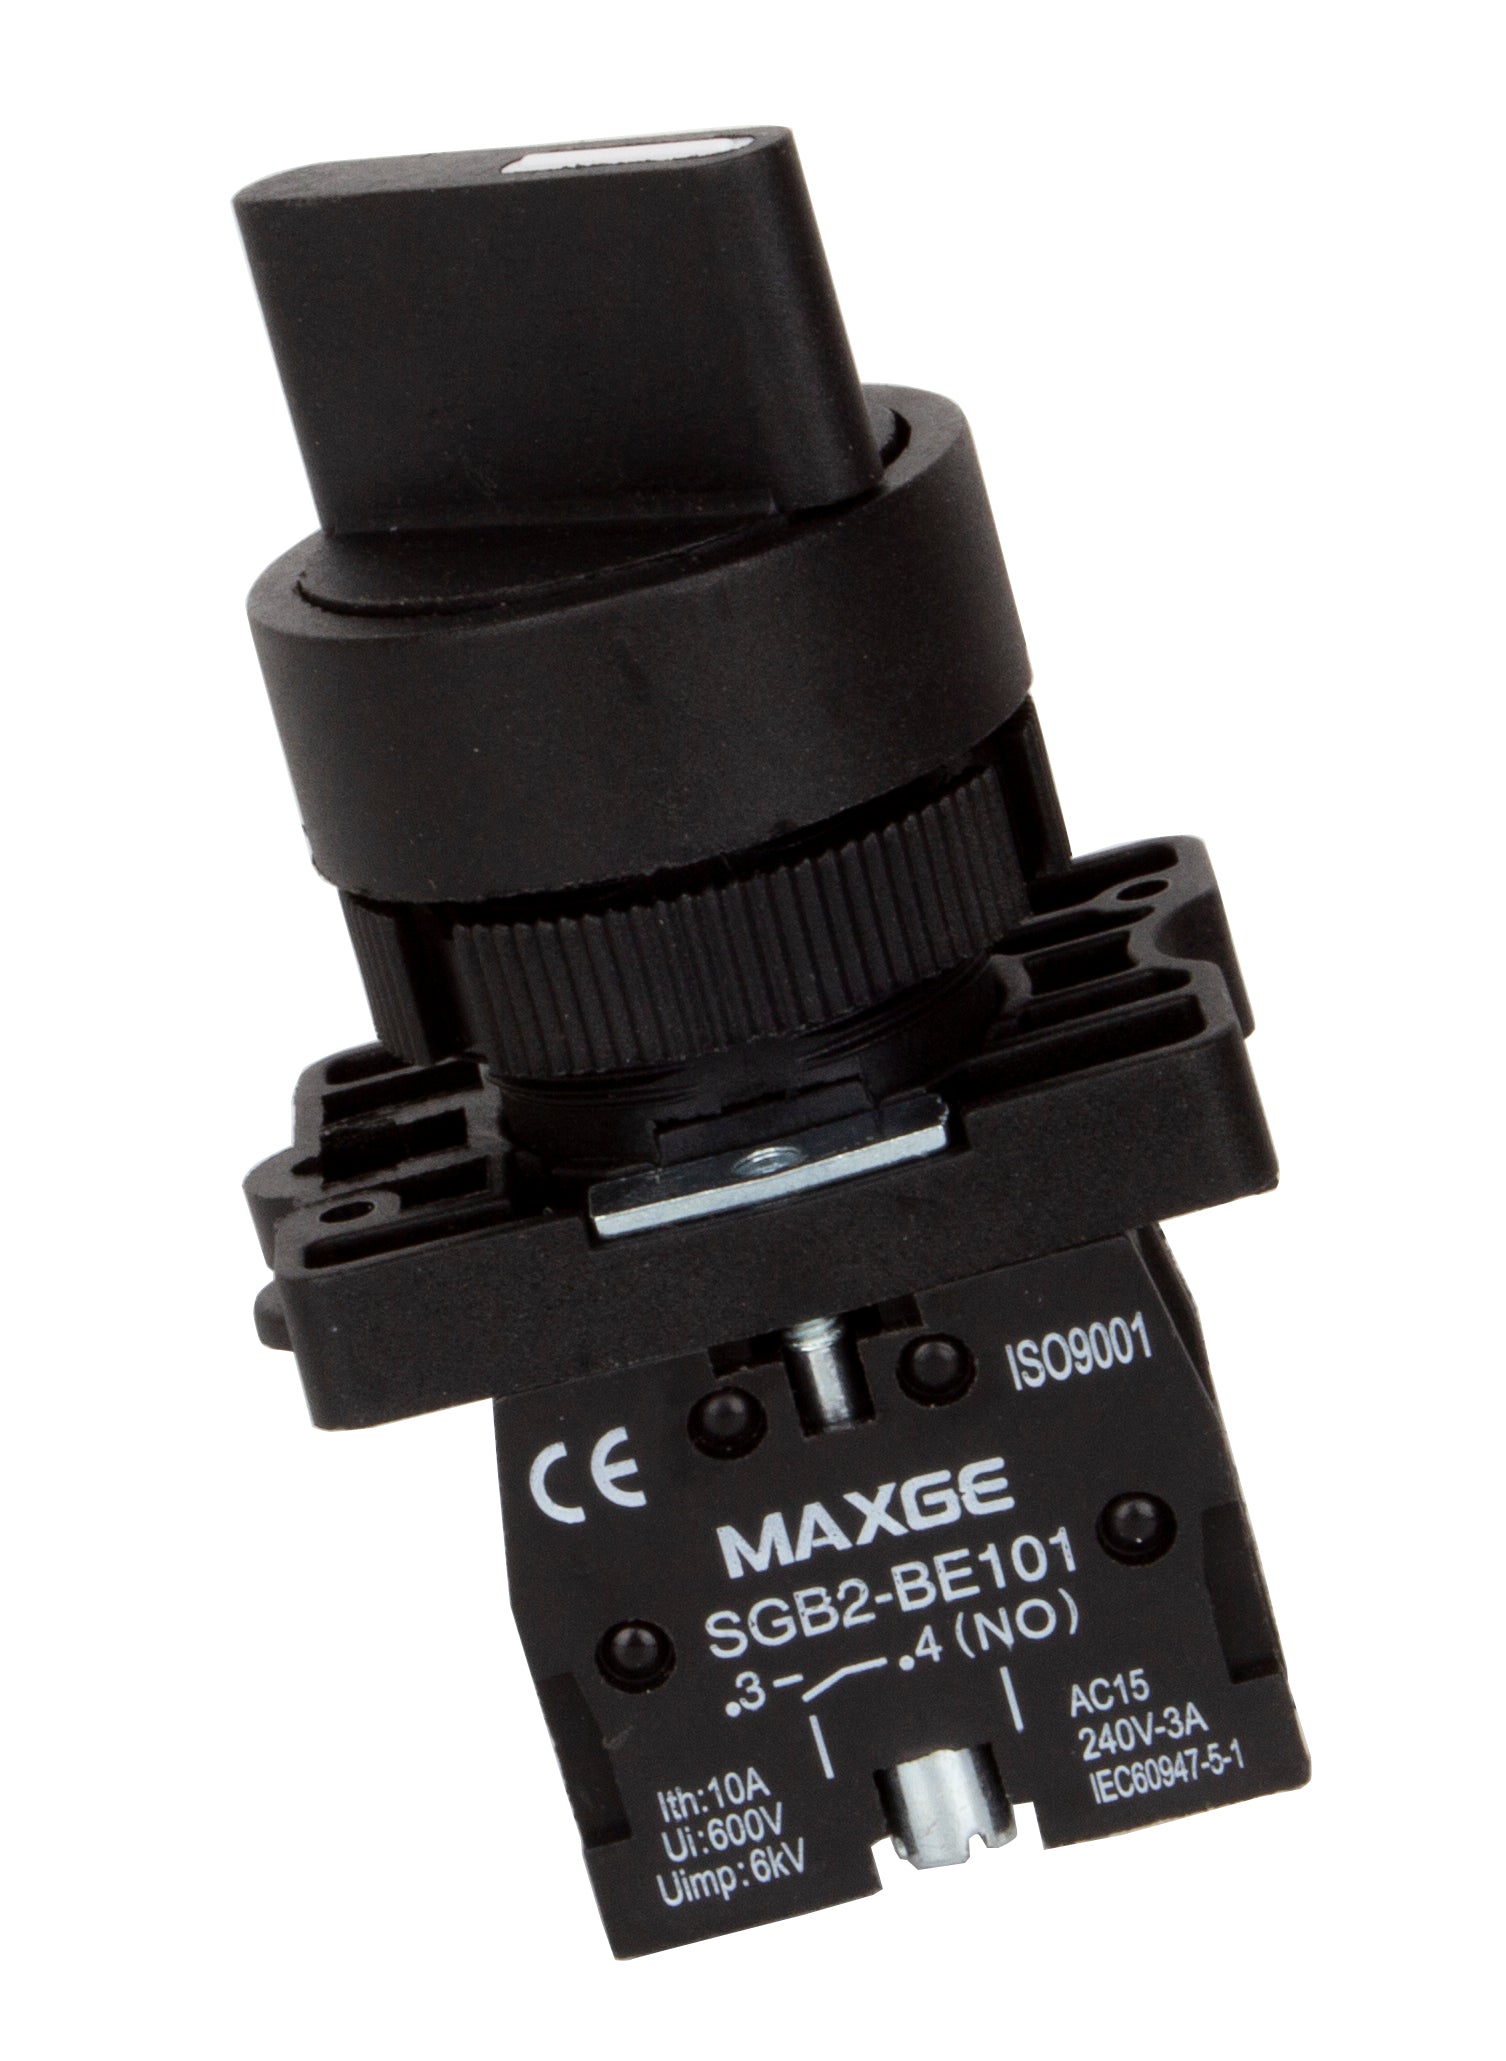 TRB-BD83, 2 x NO, 3 Position Toggle Switch BLACK, Left ON, Right Biased, 3 Amp @ 240VAC, Plastic/Metal, IEC60947-5-1